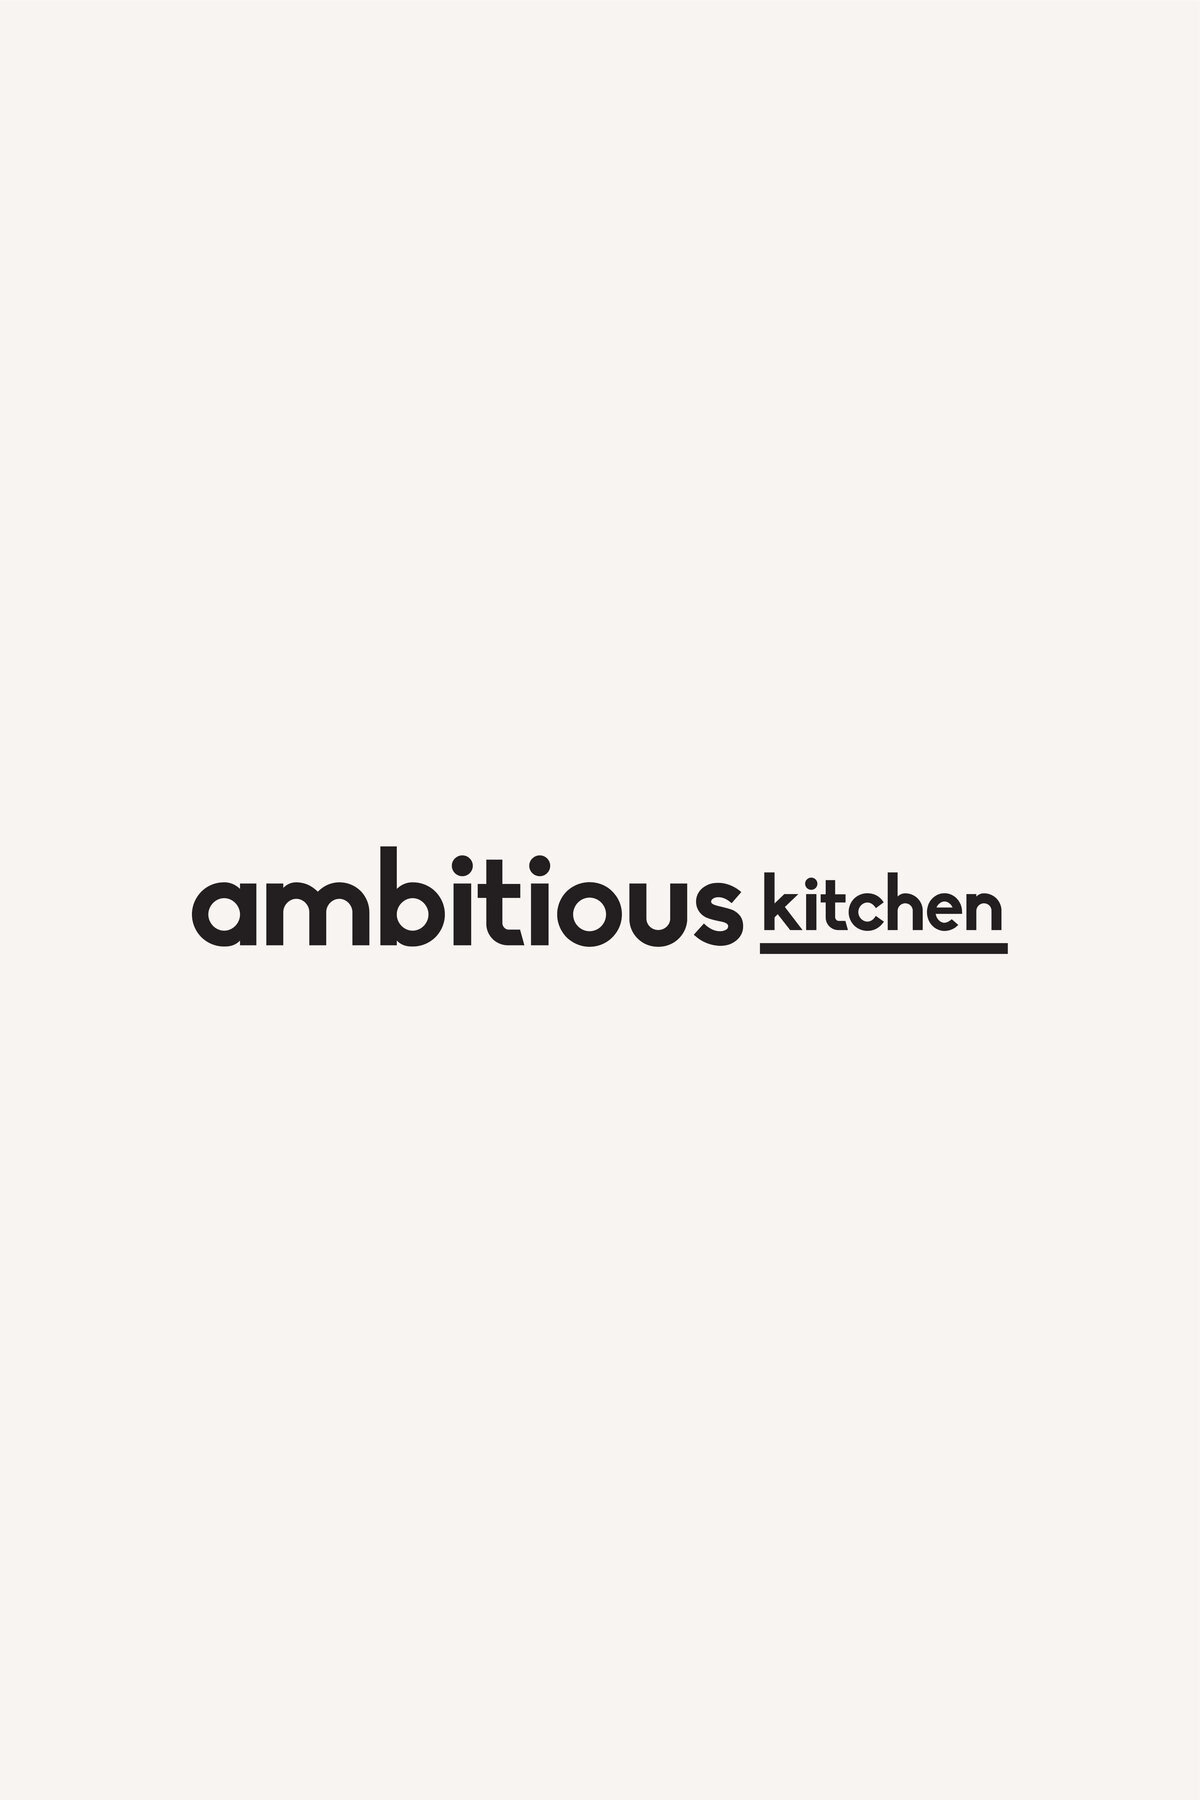 Food and Lifestyle Branding for Ambitious Kitchen by Katelyn Gambler15